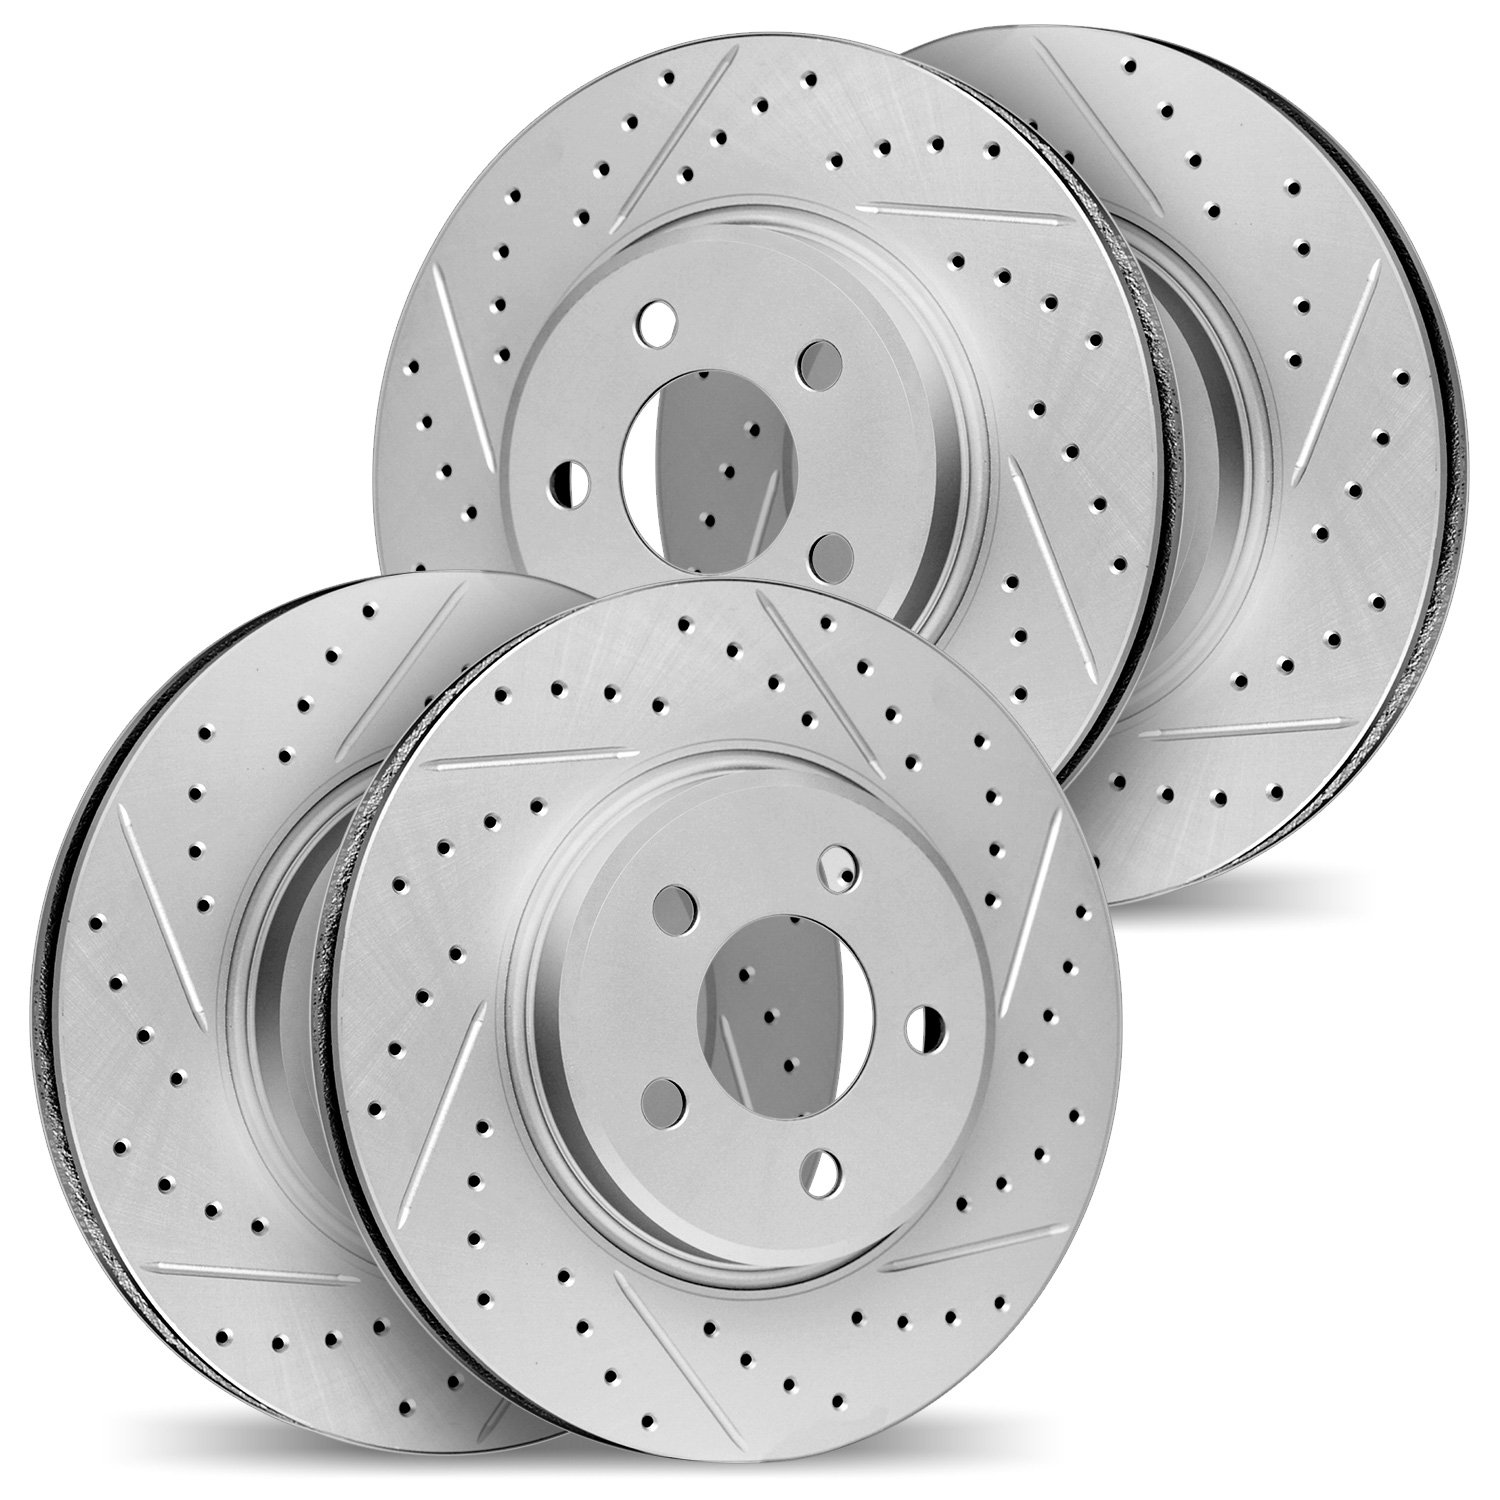 2004-31031 Geoperformance Drilled/Slotted Brake Rotors, 2004-2010 BMW, Position: Front and Rear